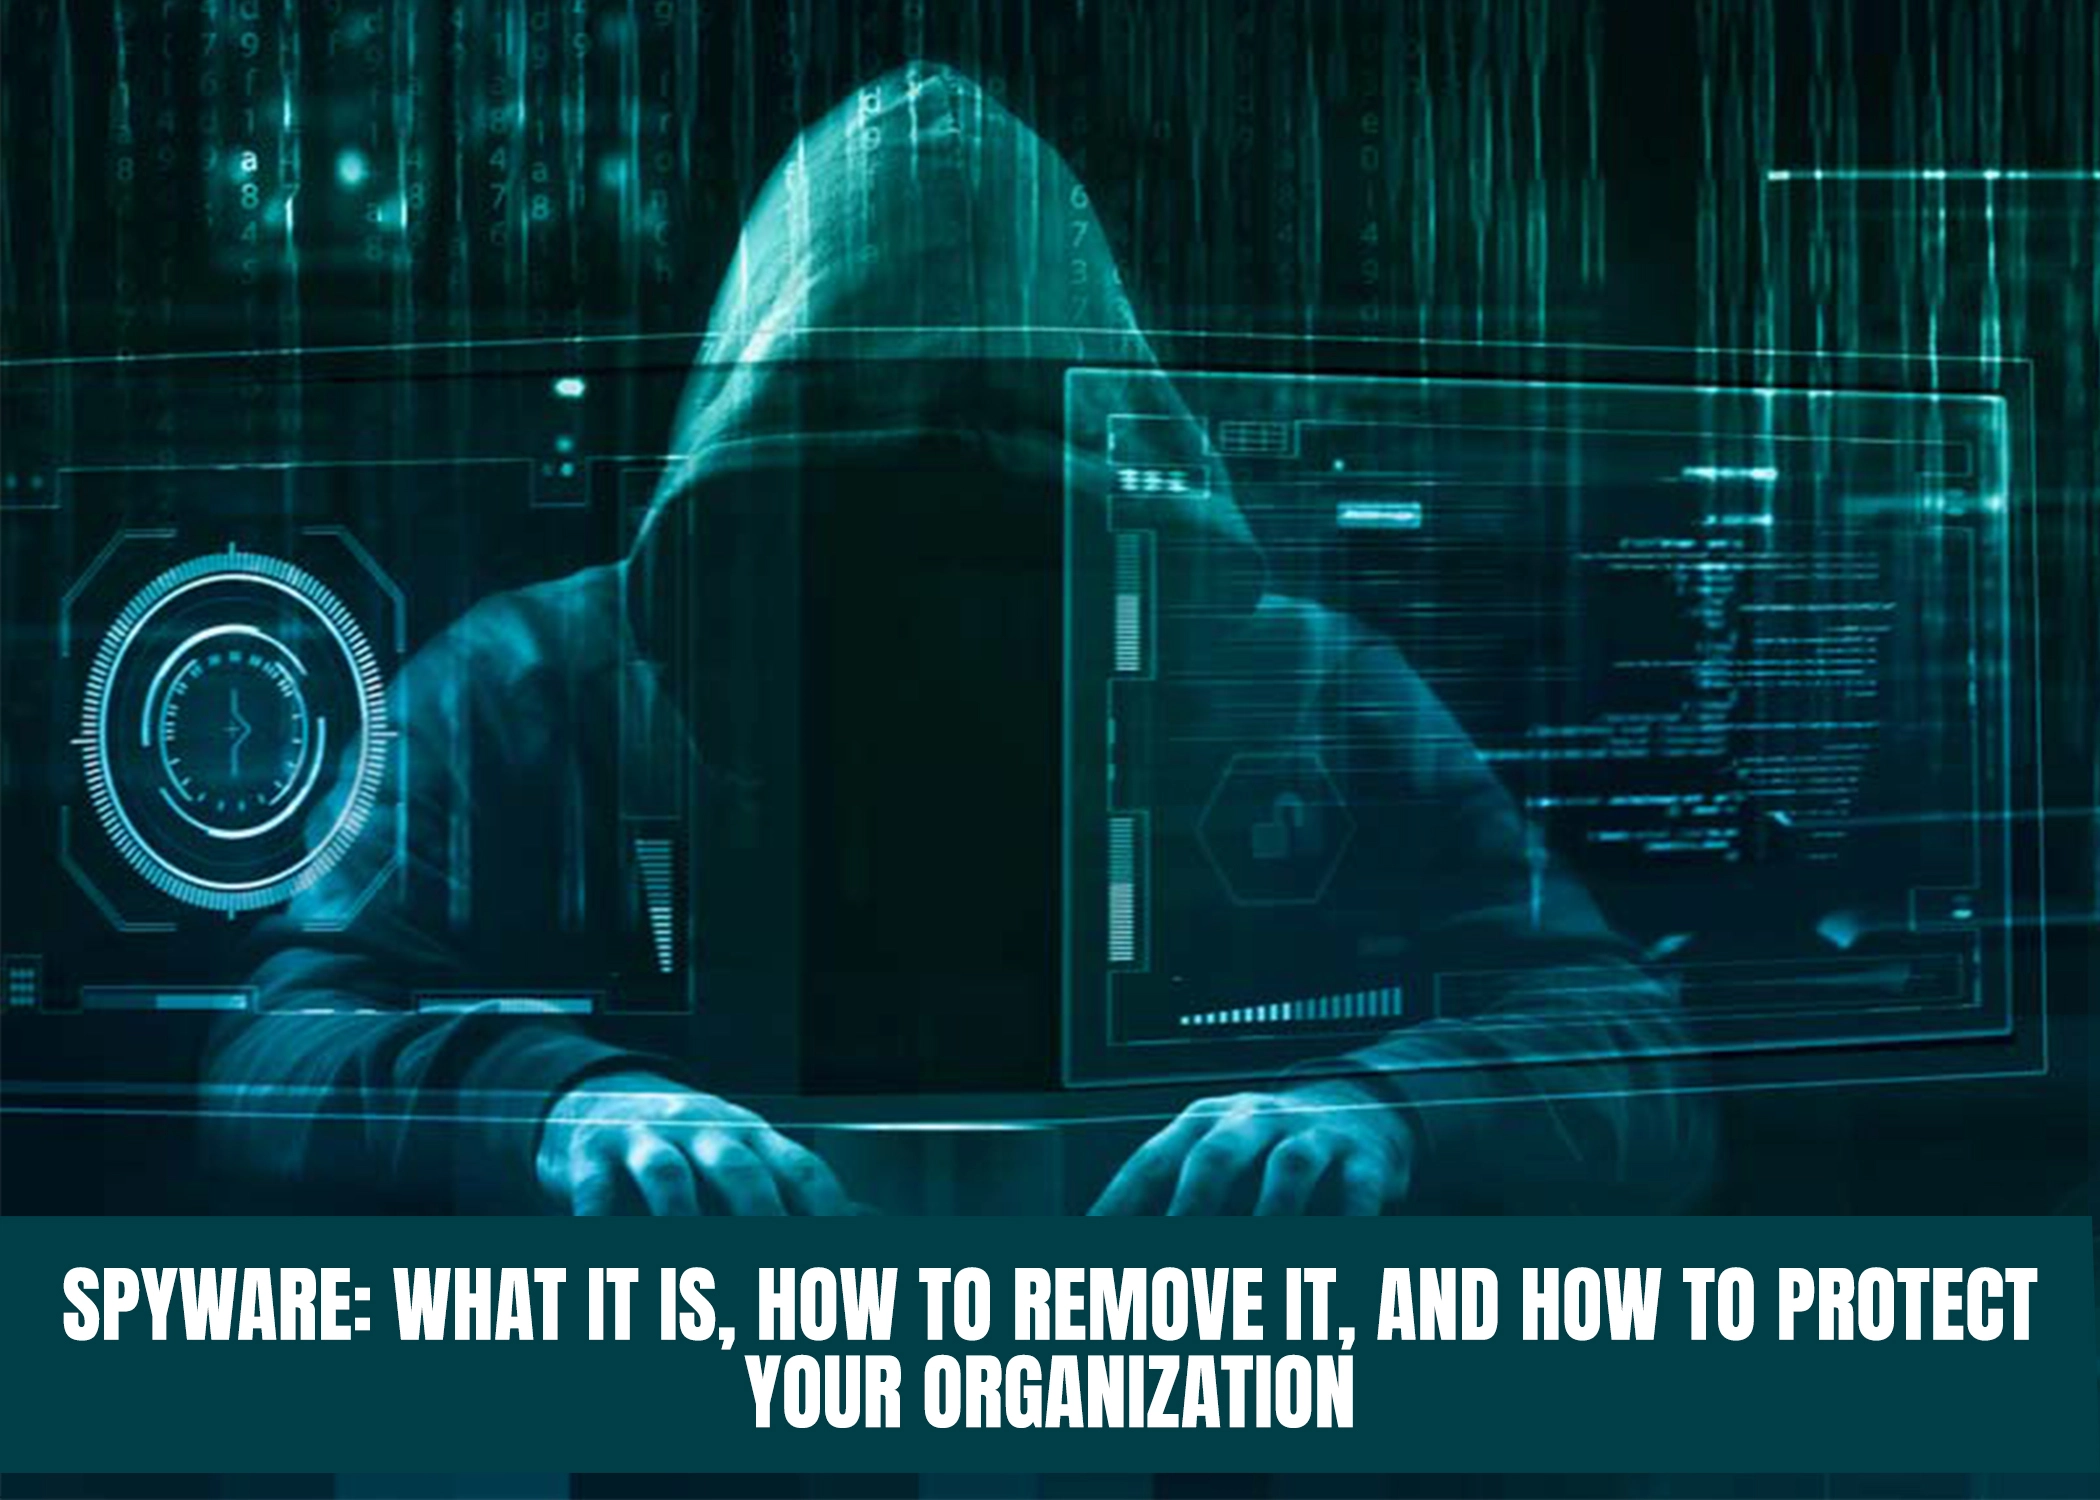 Spyware What it is, how to remove it, and how to protect your organization